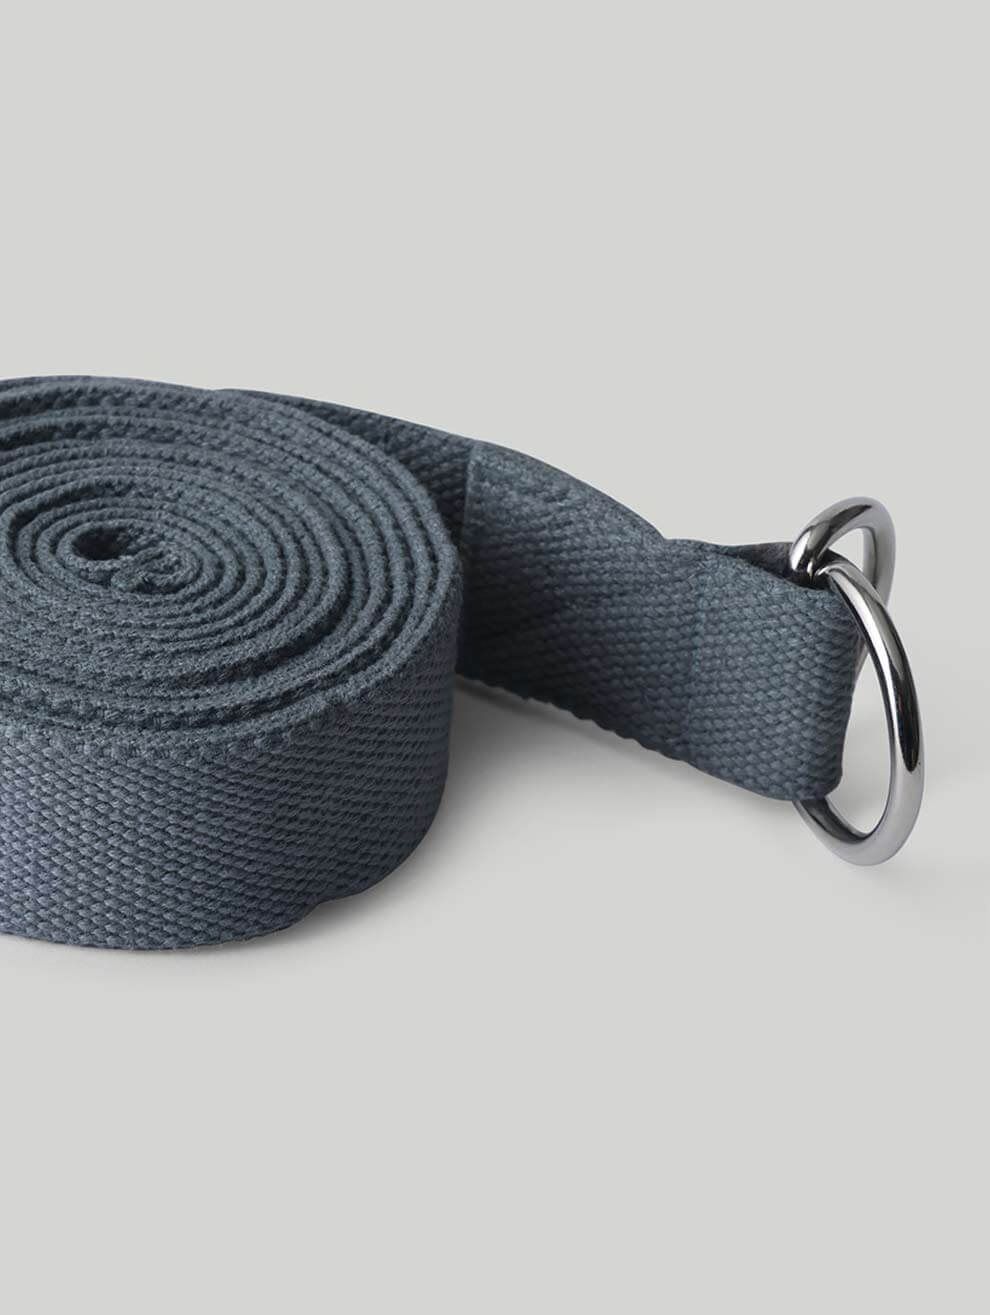 Buy Aprodo Grey Yoga Strap 10 Feet, 1.5 Width 100% Cotton Anti Skid Straps  with Adjustable D-Ring Buckle, Best for Yoga, Body Flexibility & General  Fitness, (Pack of 1 pc) Online at